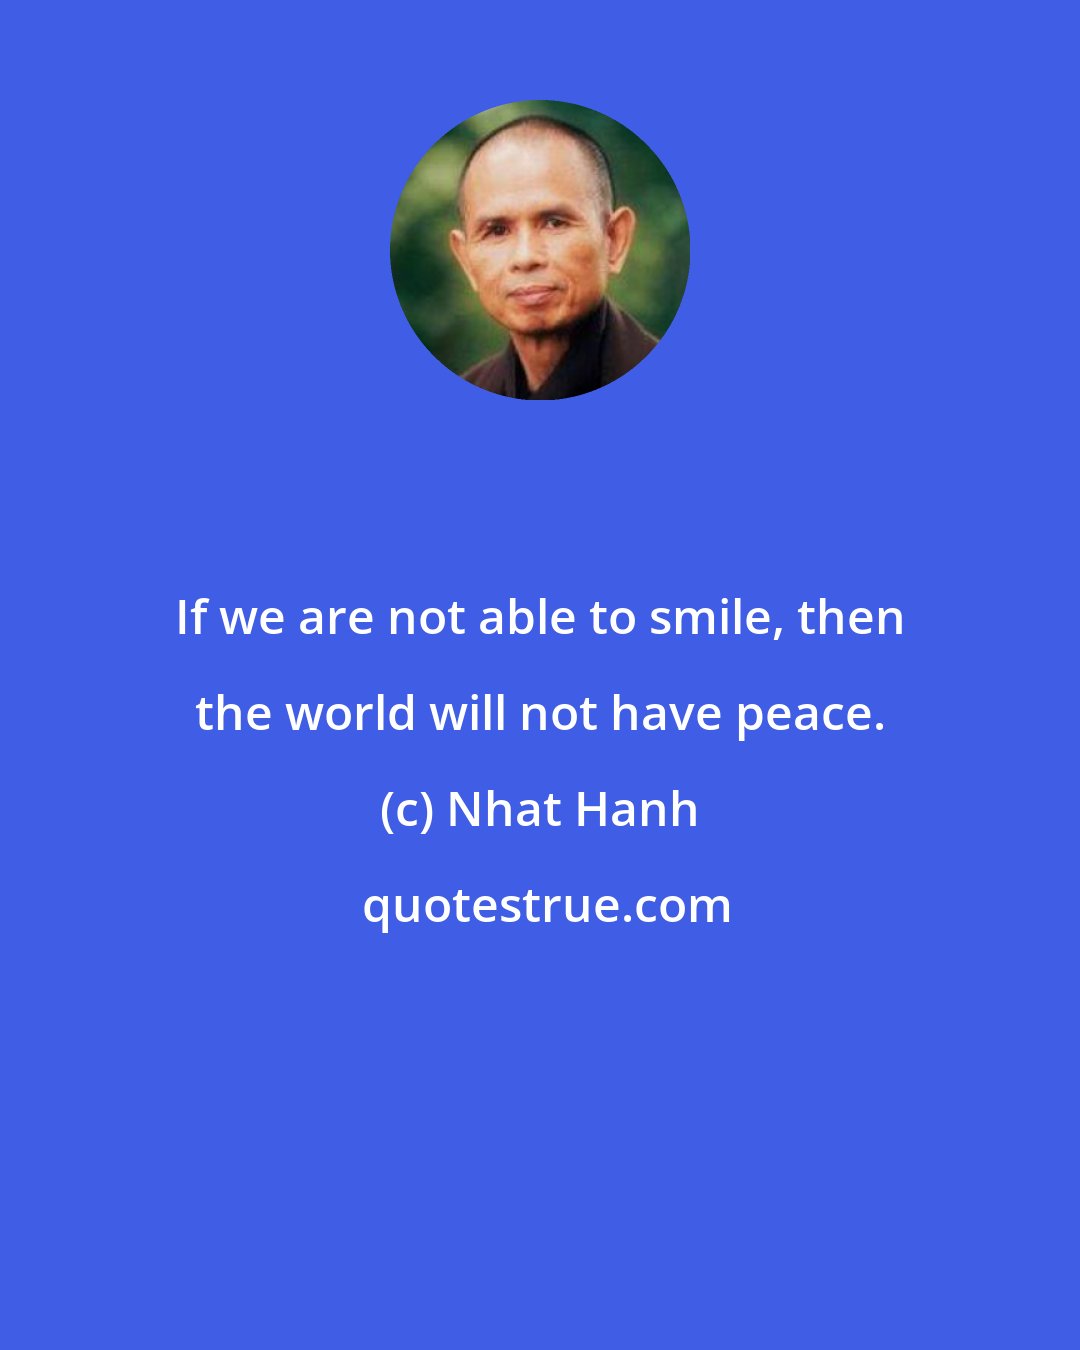 Nhat Hanh: If we are not able to smile, then the world will not have peace.